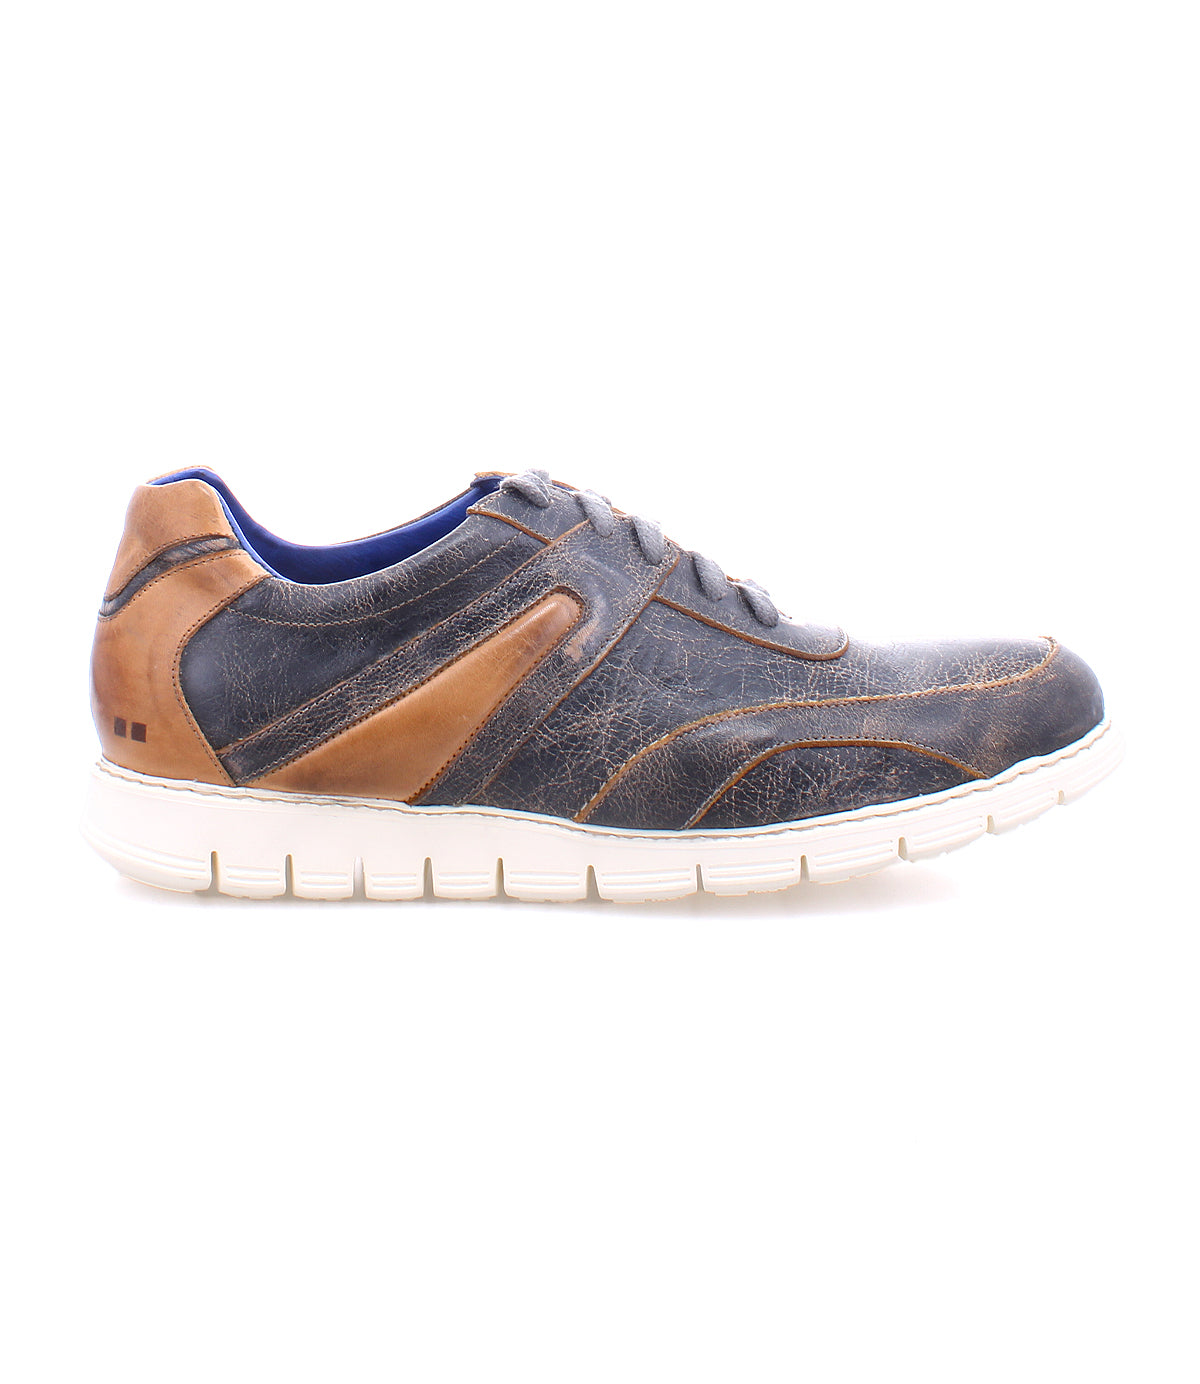 A single Wardell by Bed Stu casual blue and brown leather sneaker with a distressed lace-up design and a white sole isolated on a white background.